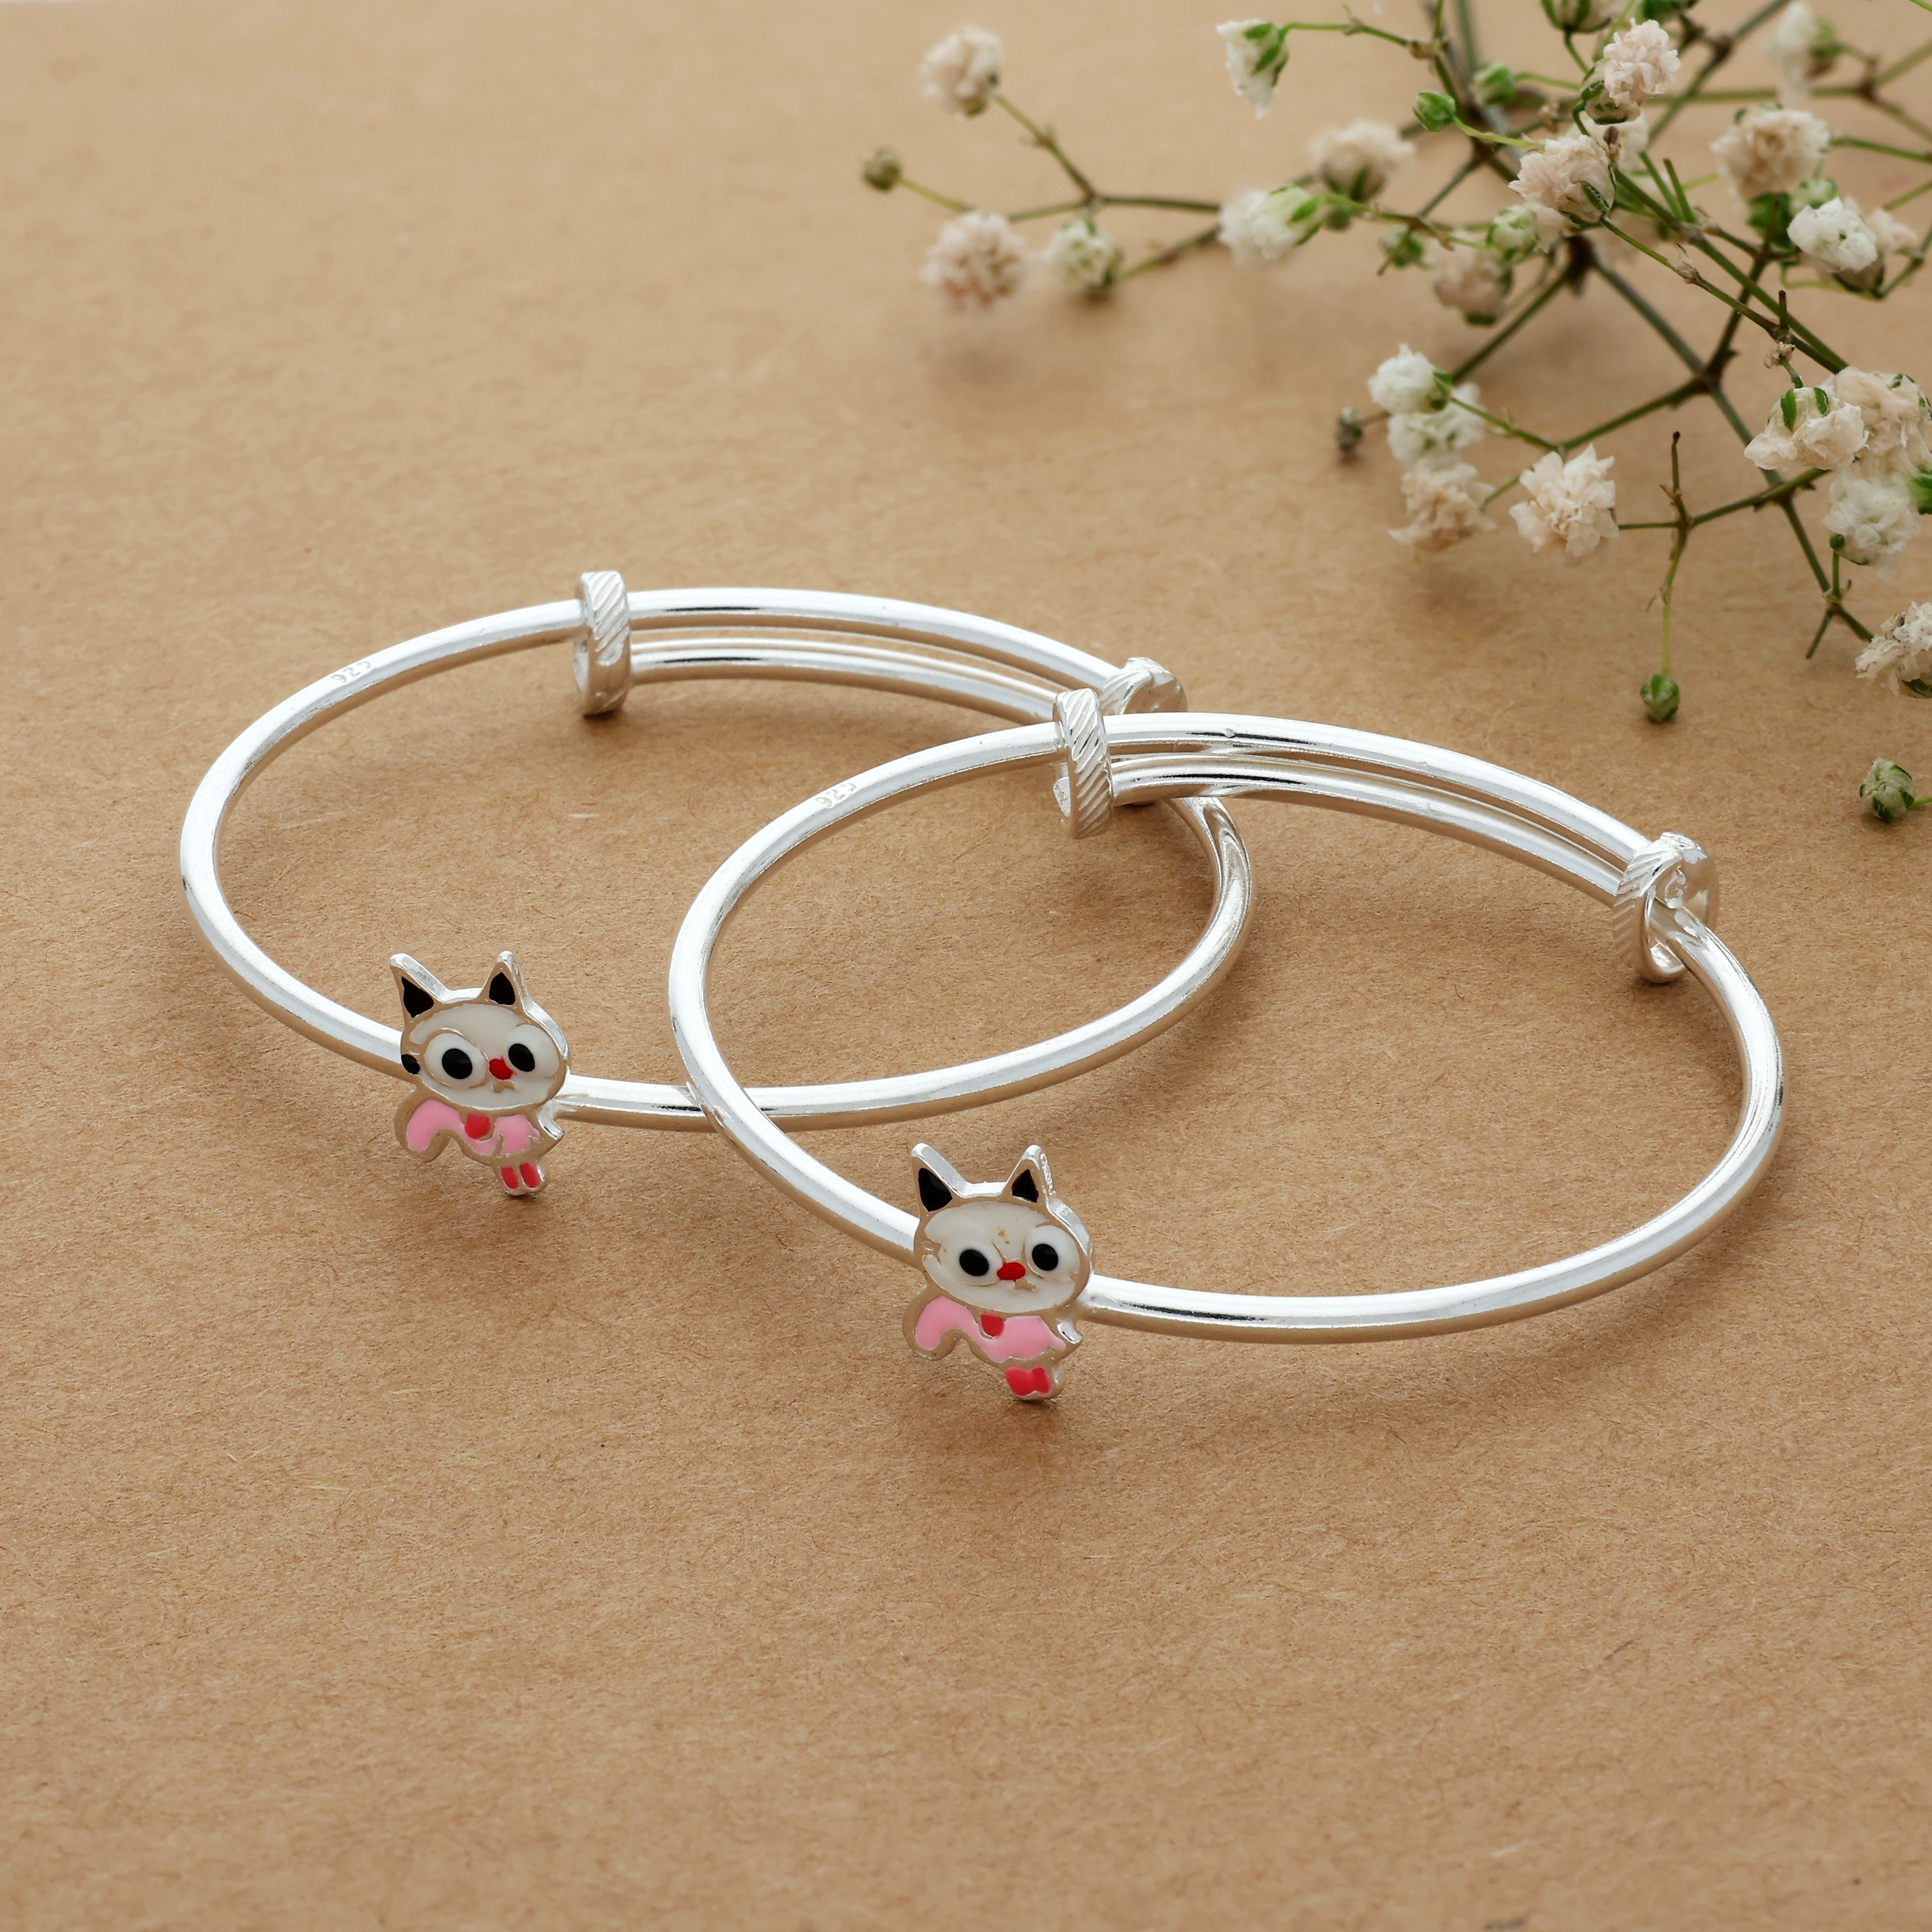 pure adjustable sterling silver bangle with cat design for kids from 0 to 5 years